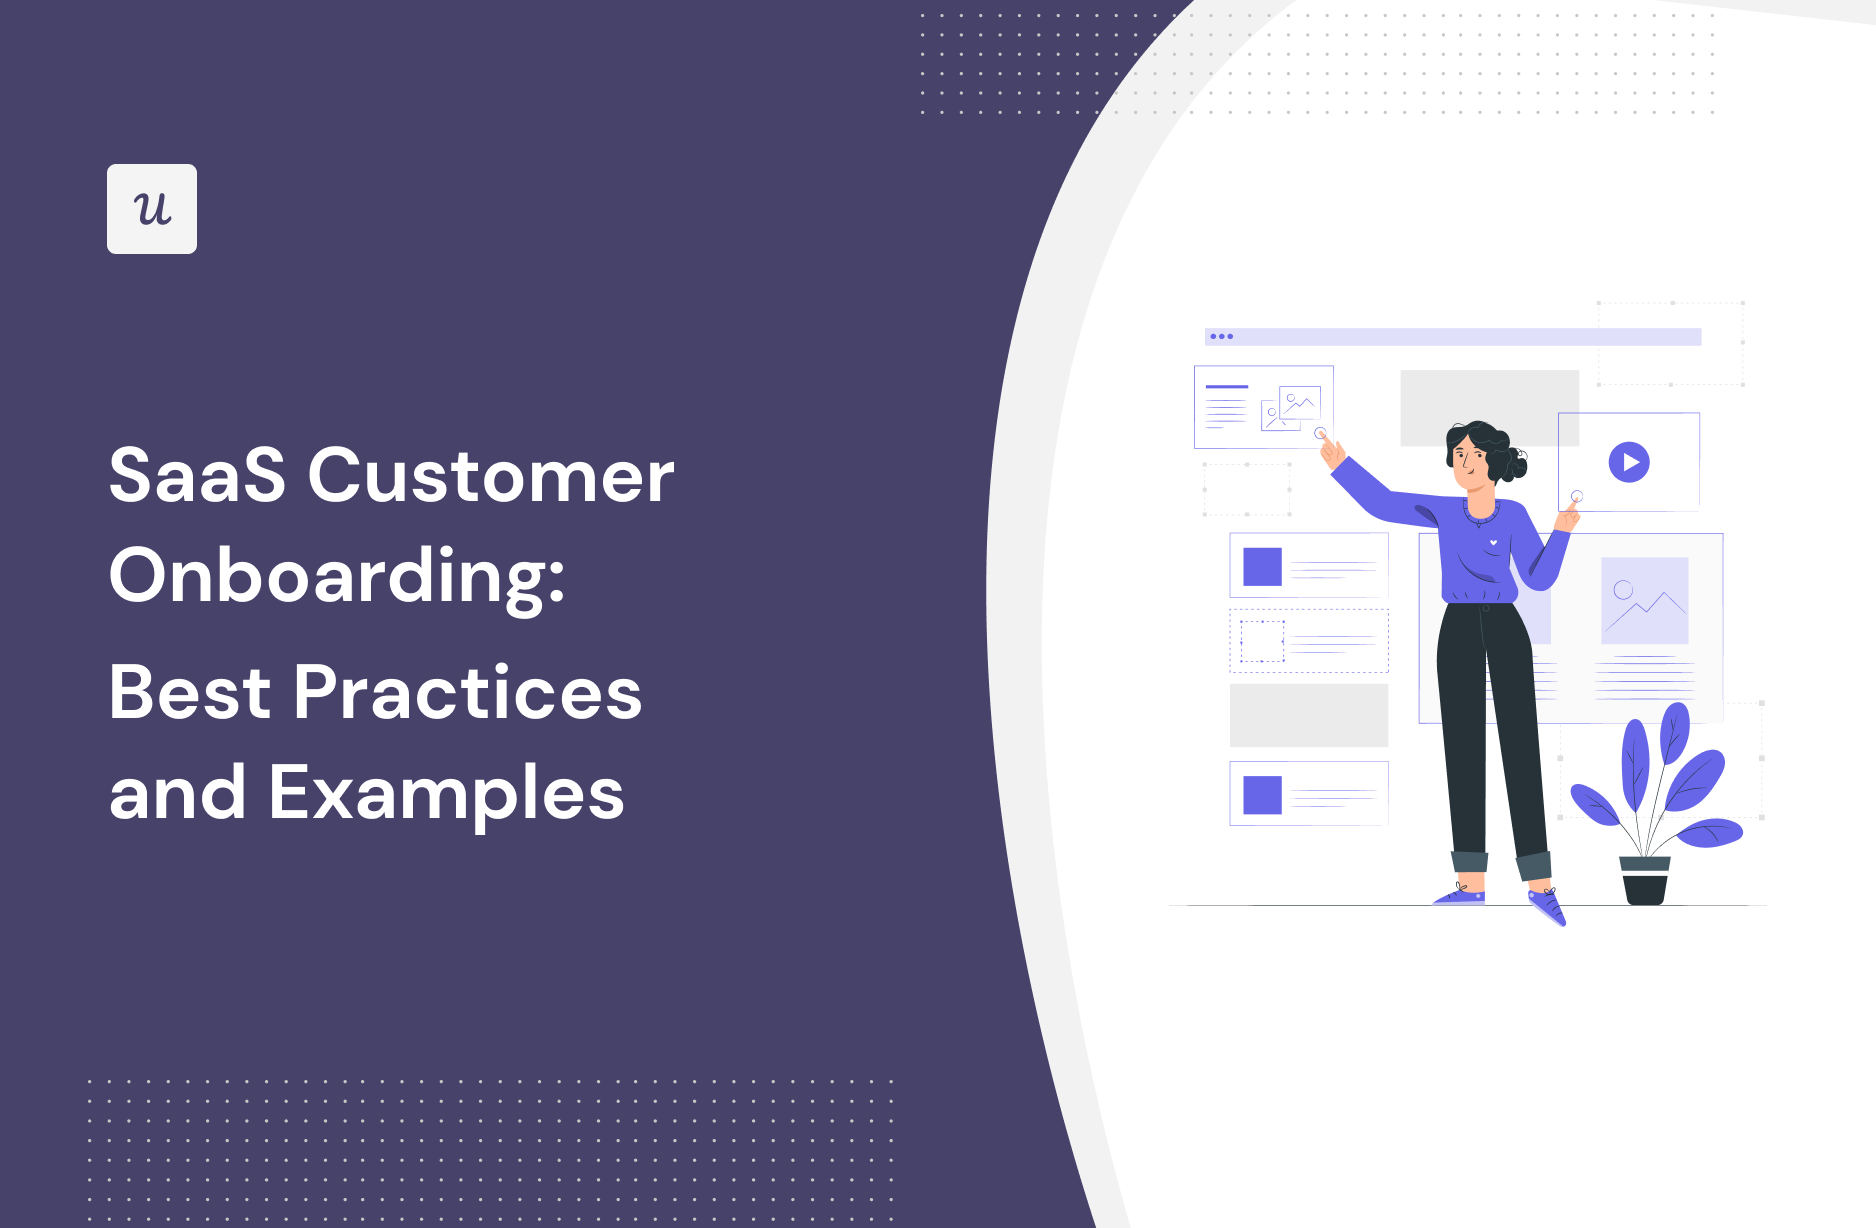 SaaS Customer Onboarding: Best Practices and Examples